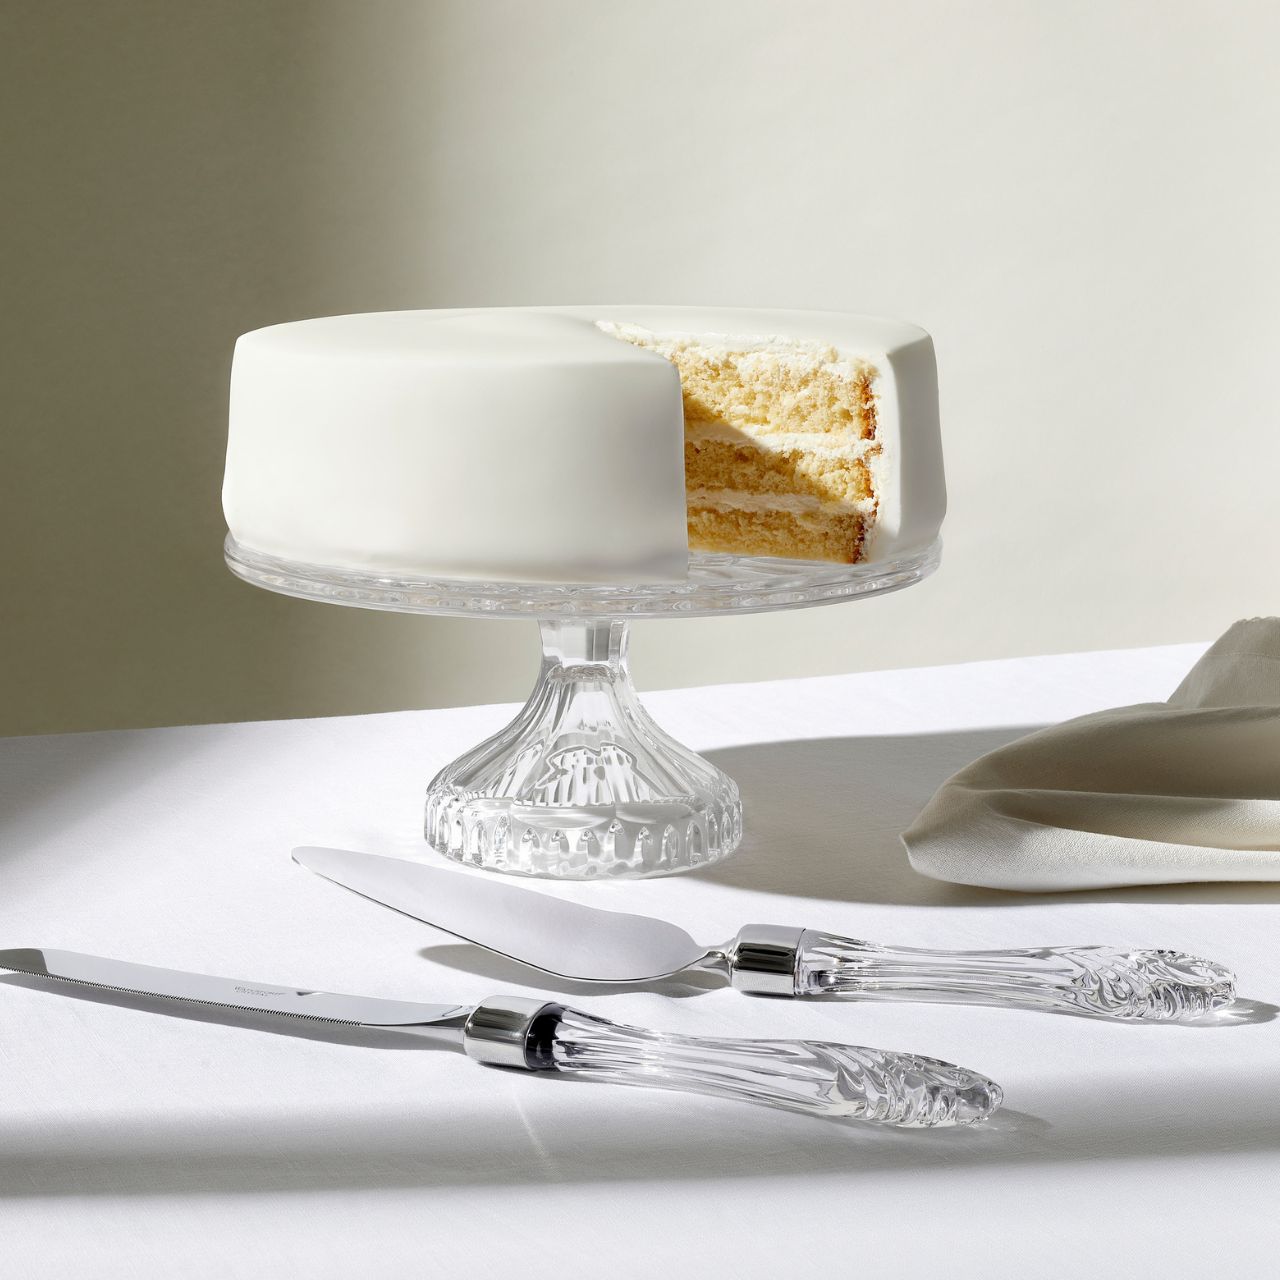 Lismore Cake Pie Server by Waterford  The Waterford Lismore pattern is a stunning combination of brilliance and clarity. A crystal keepsake to be treasured for years to come, the Lismore Cake/Pie Server features an elegant, fine crystal handle intricately detailed in Lismore's signature diamond and wedge cuts.